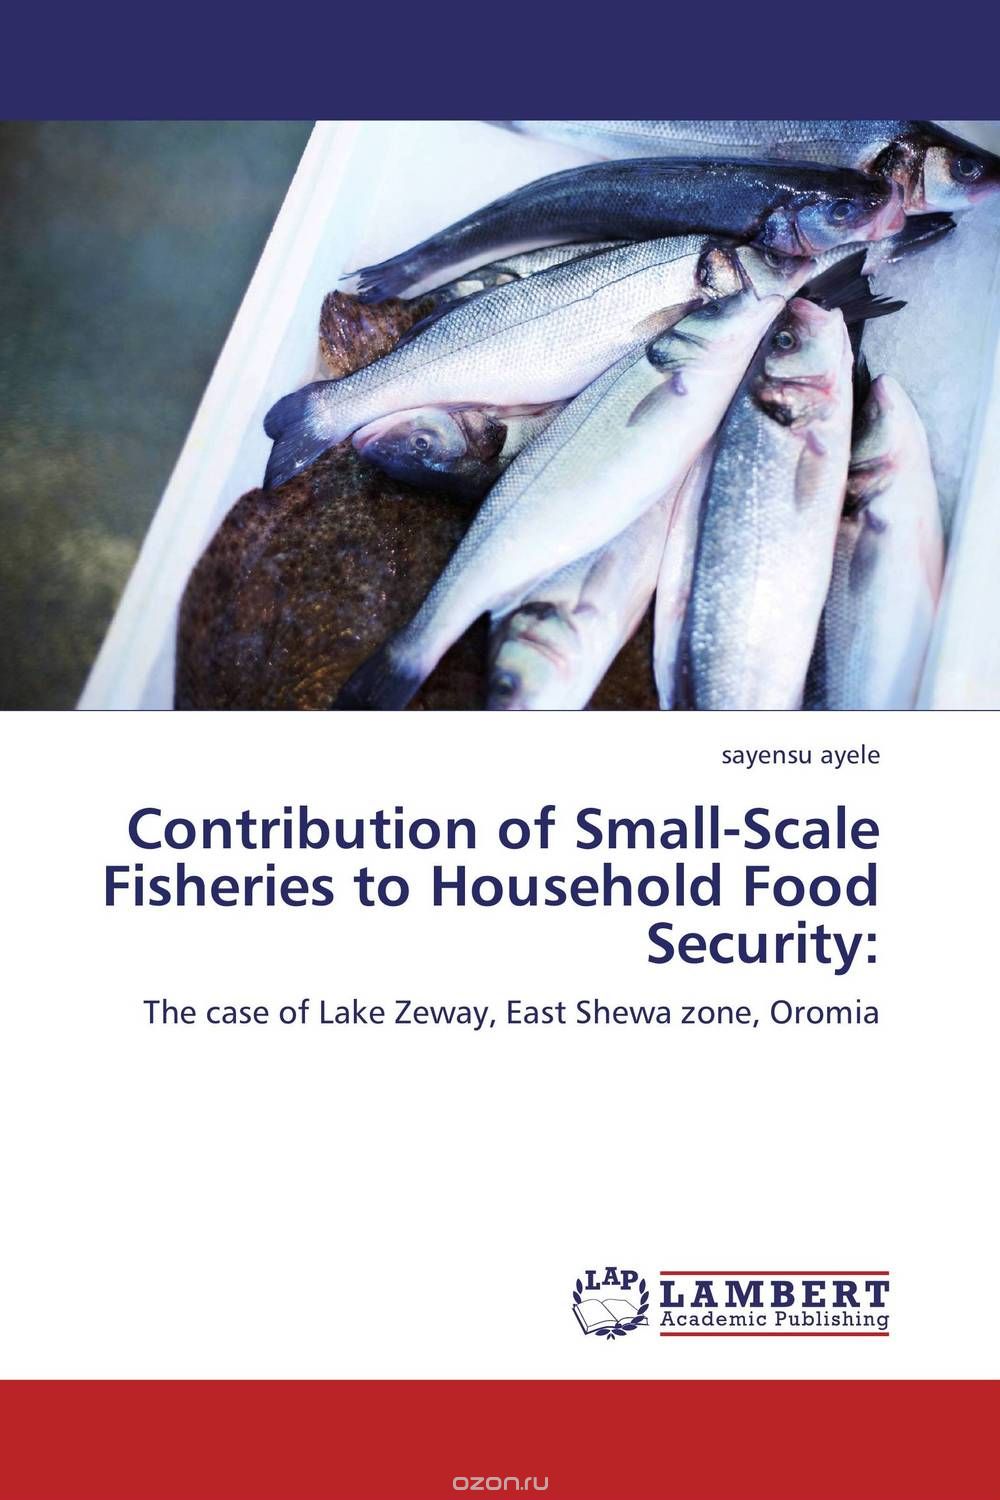 Скачать книгу "Contribution of Small-Scale Fisheries to Household Food Security:"